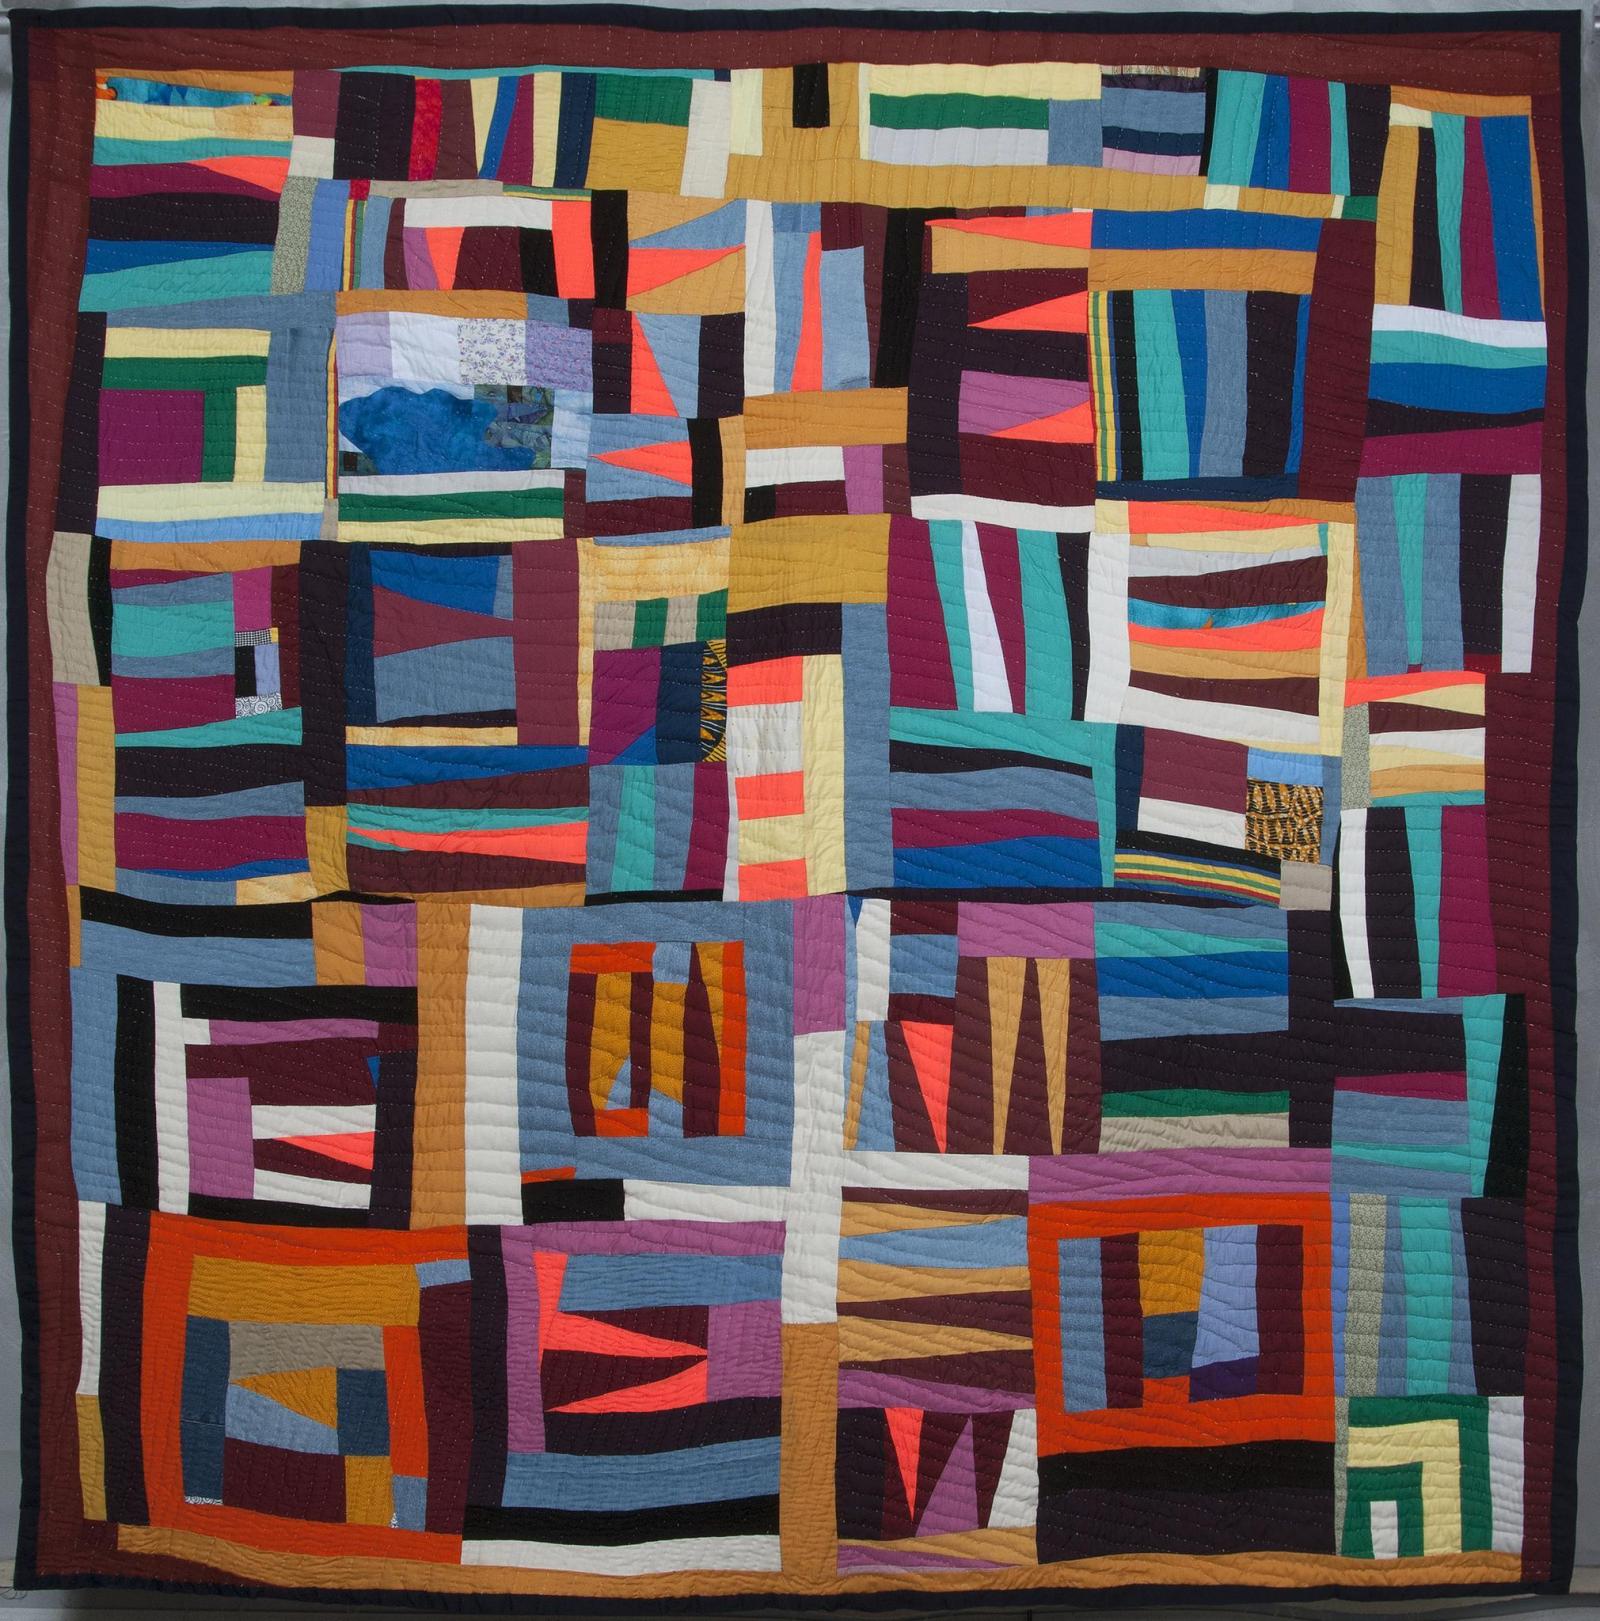 Example of a Gee's Bend Quilt (Alabama)